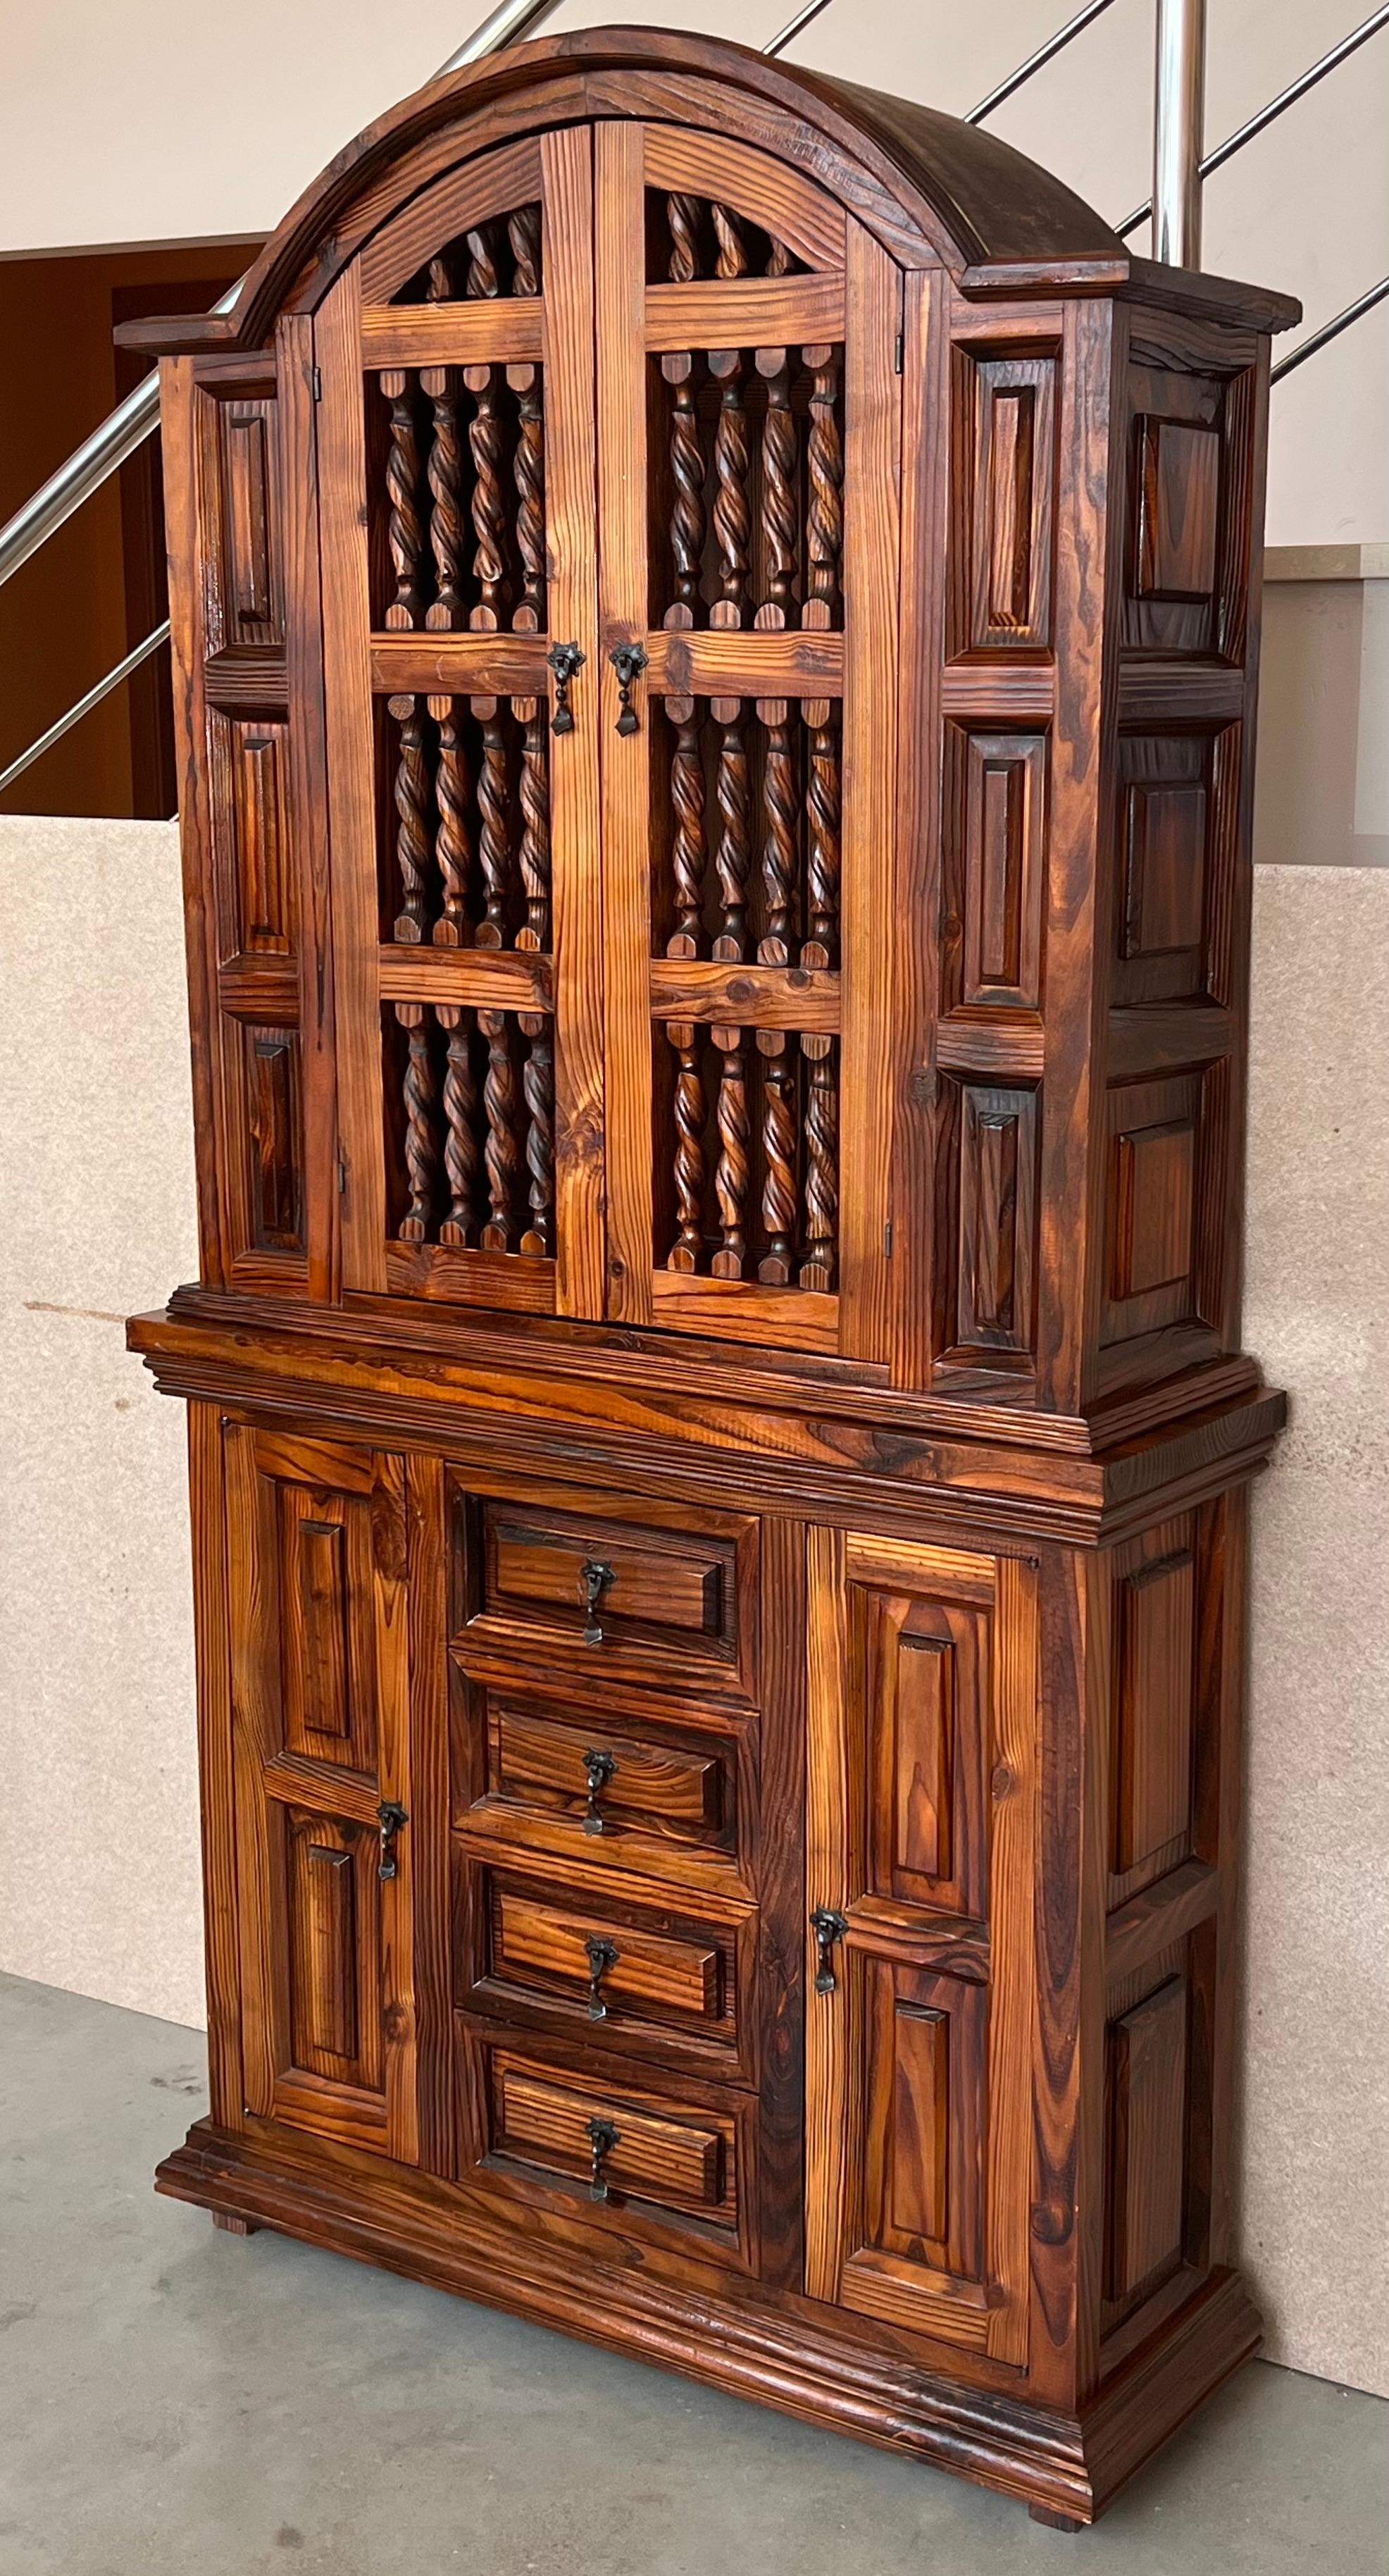 Grand 20th century Spanish cabinet constructed from pine. Features a coffered case fronted by two doors in the high part and four drawers and two doors in the low part. This massive cabinet made in Spain features beautiful walnut grain and showcases